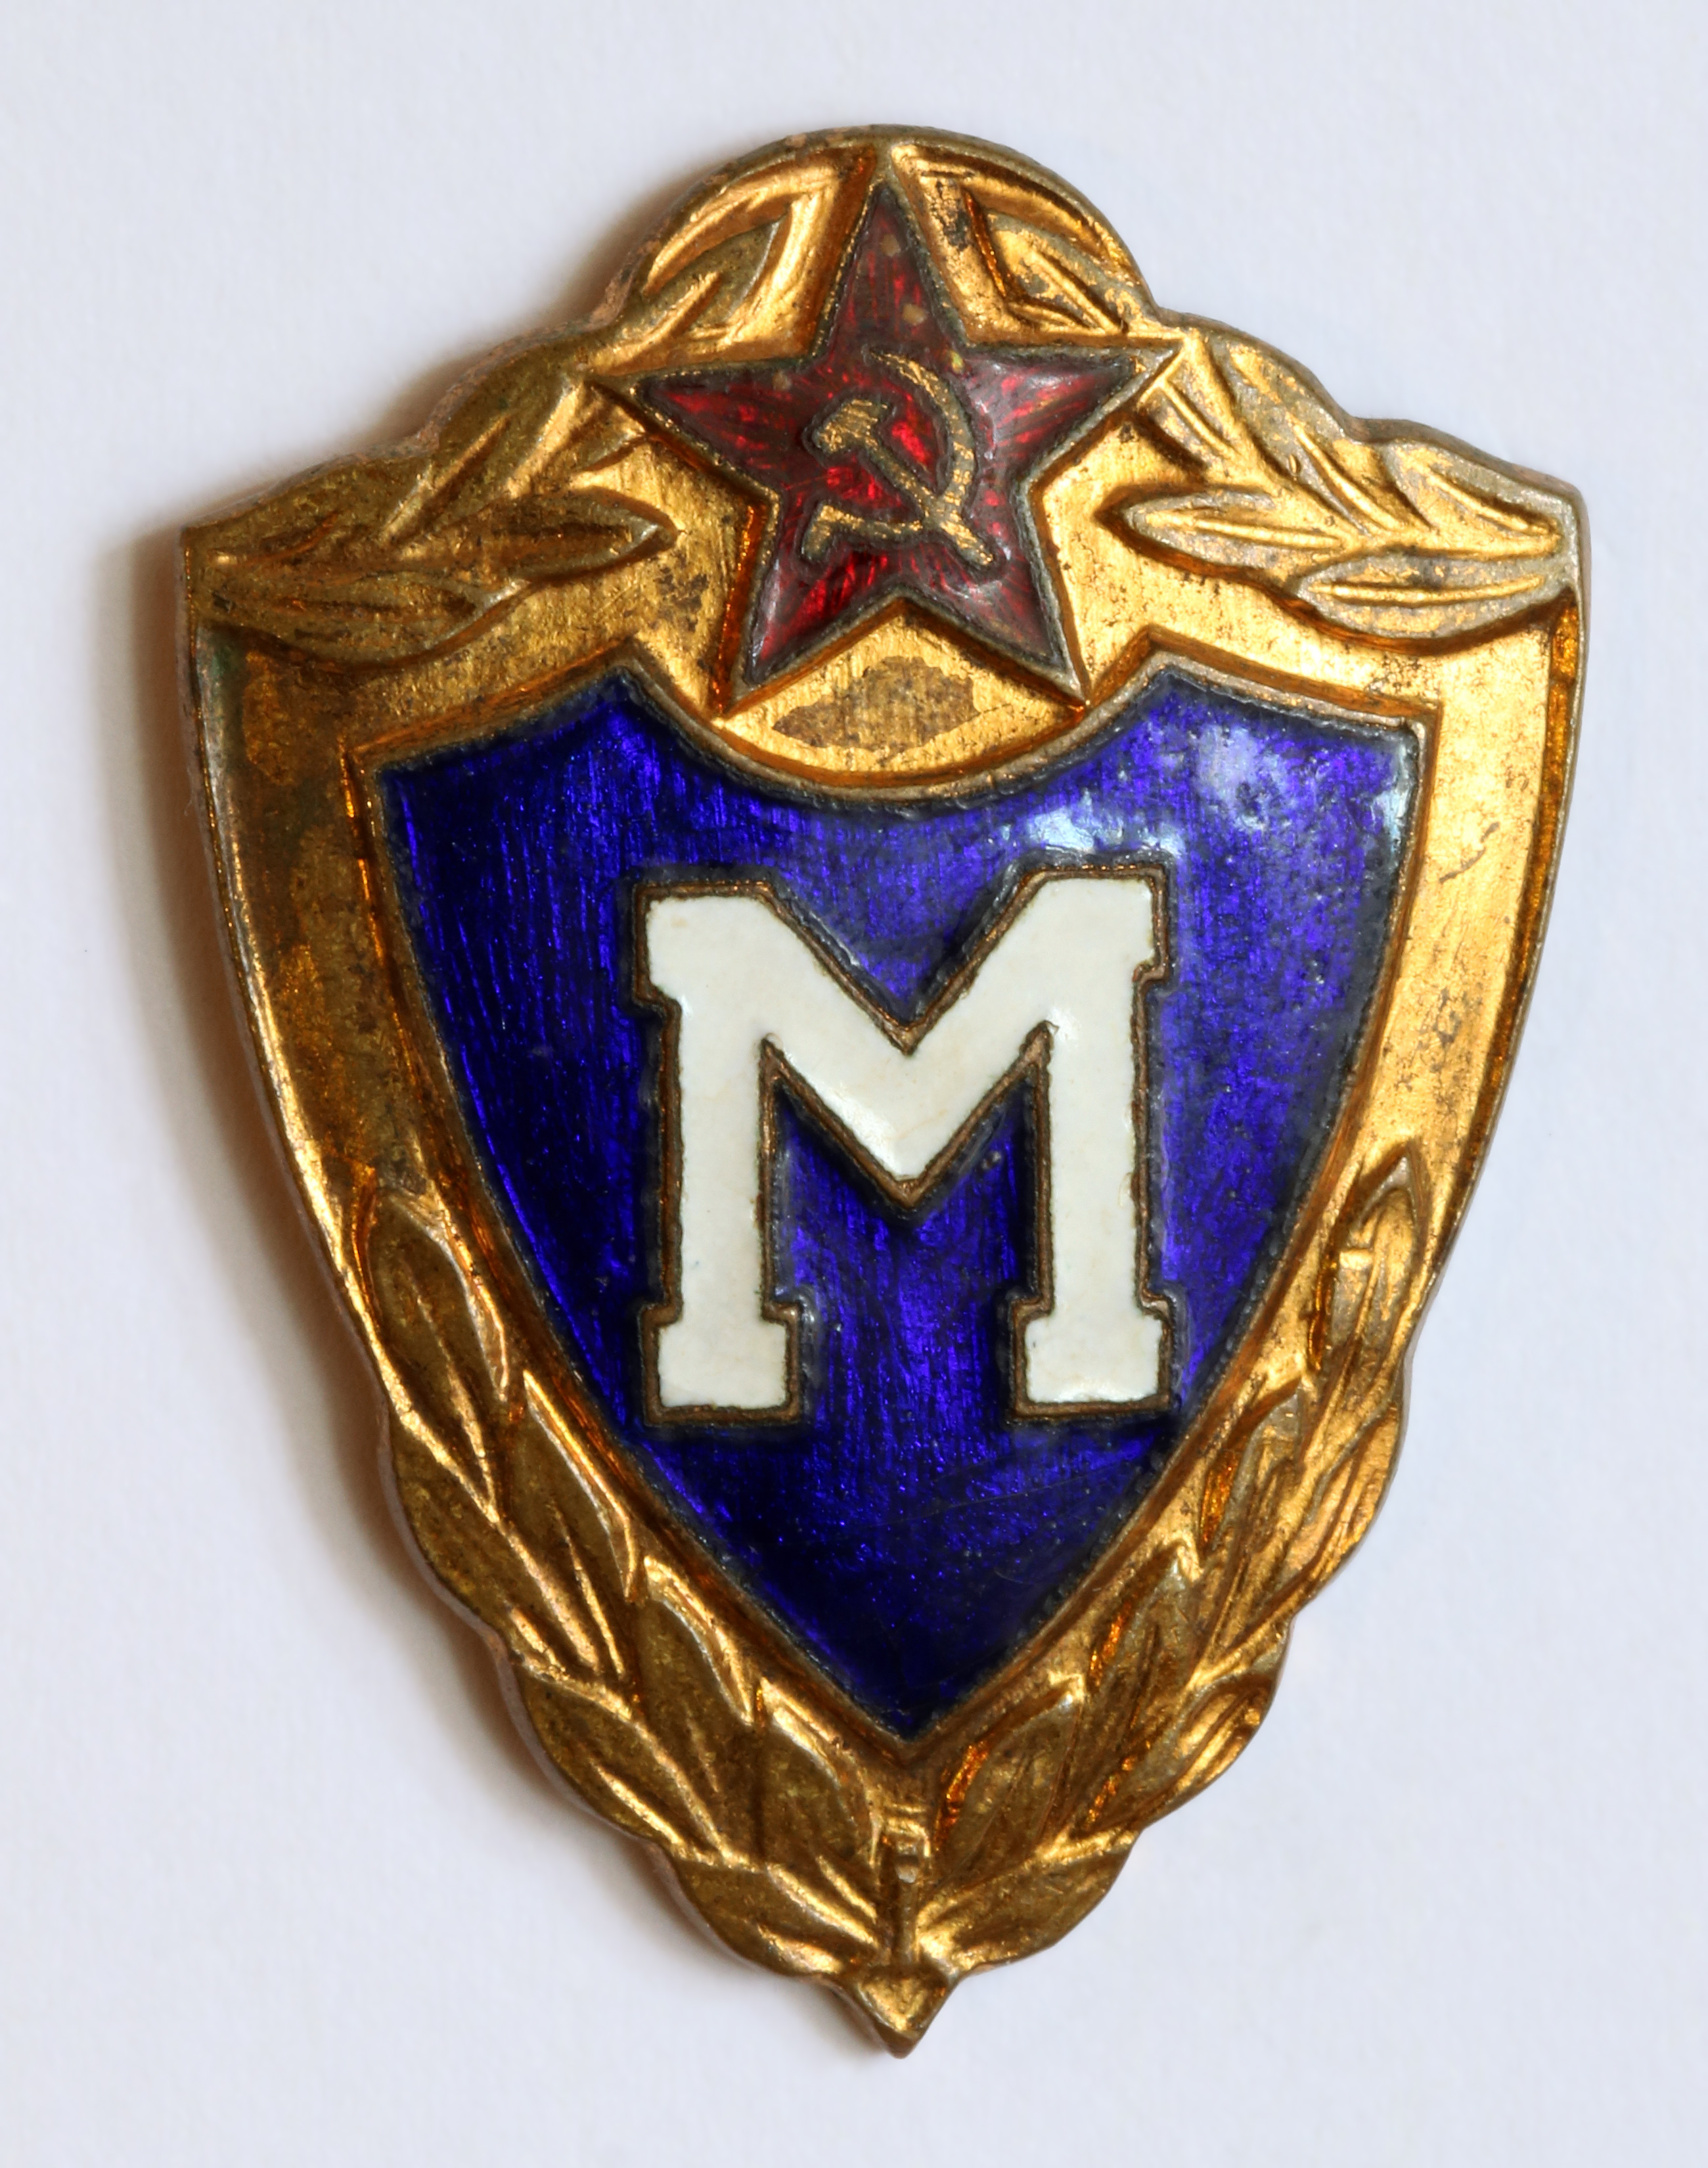 Master S badge USSR later